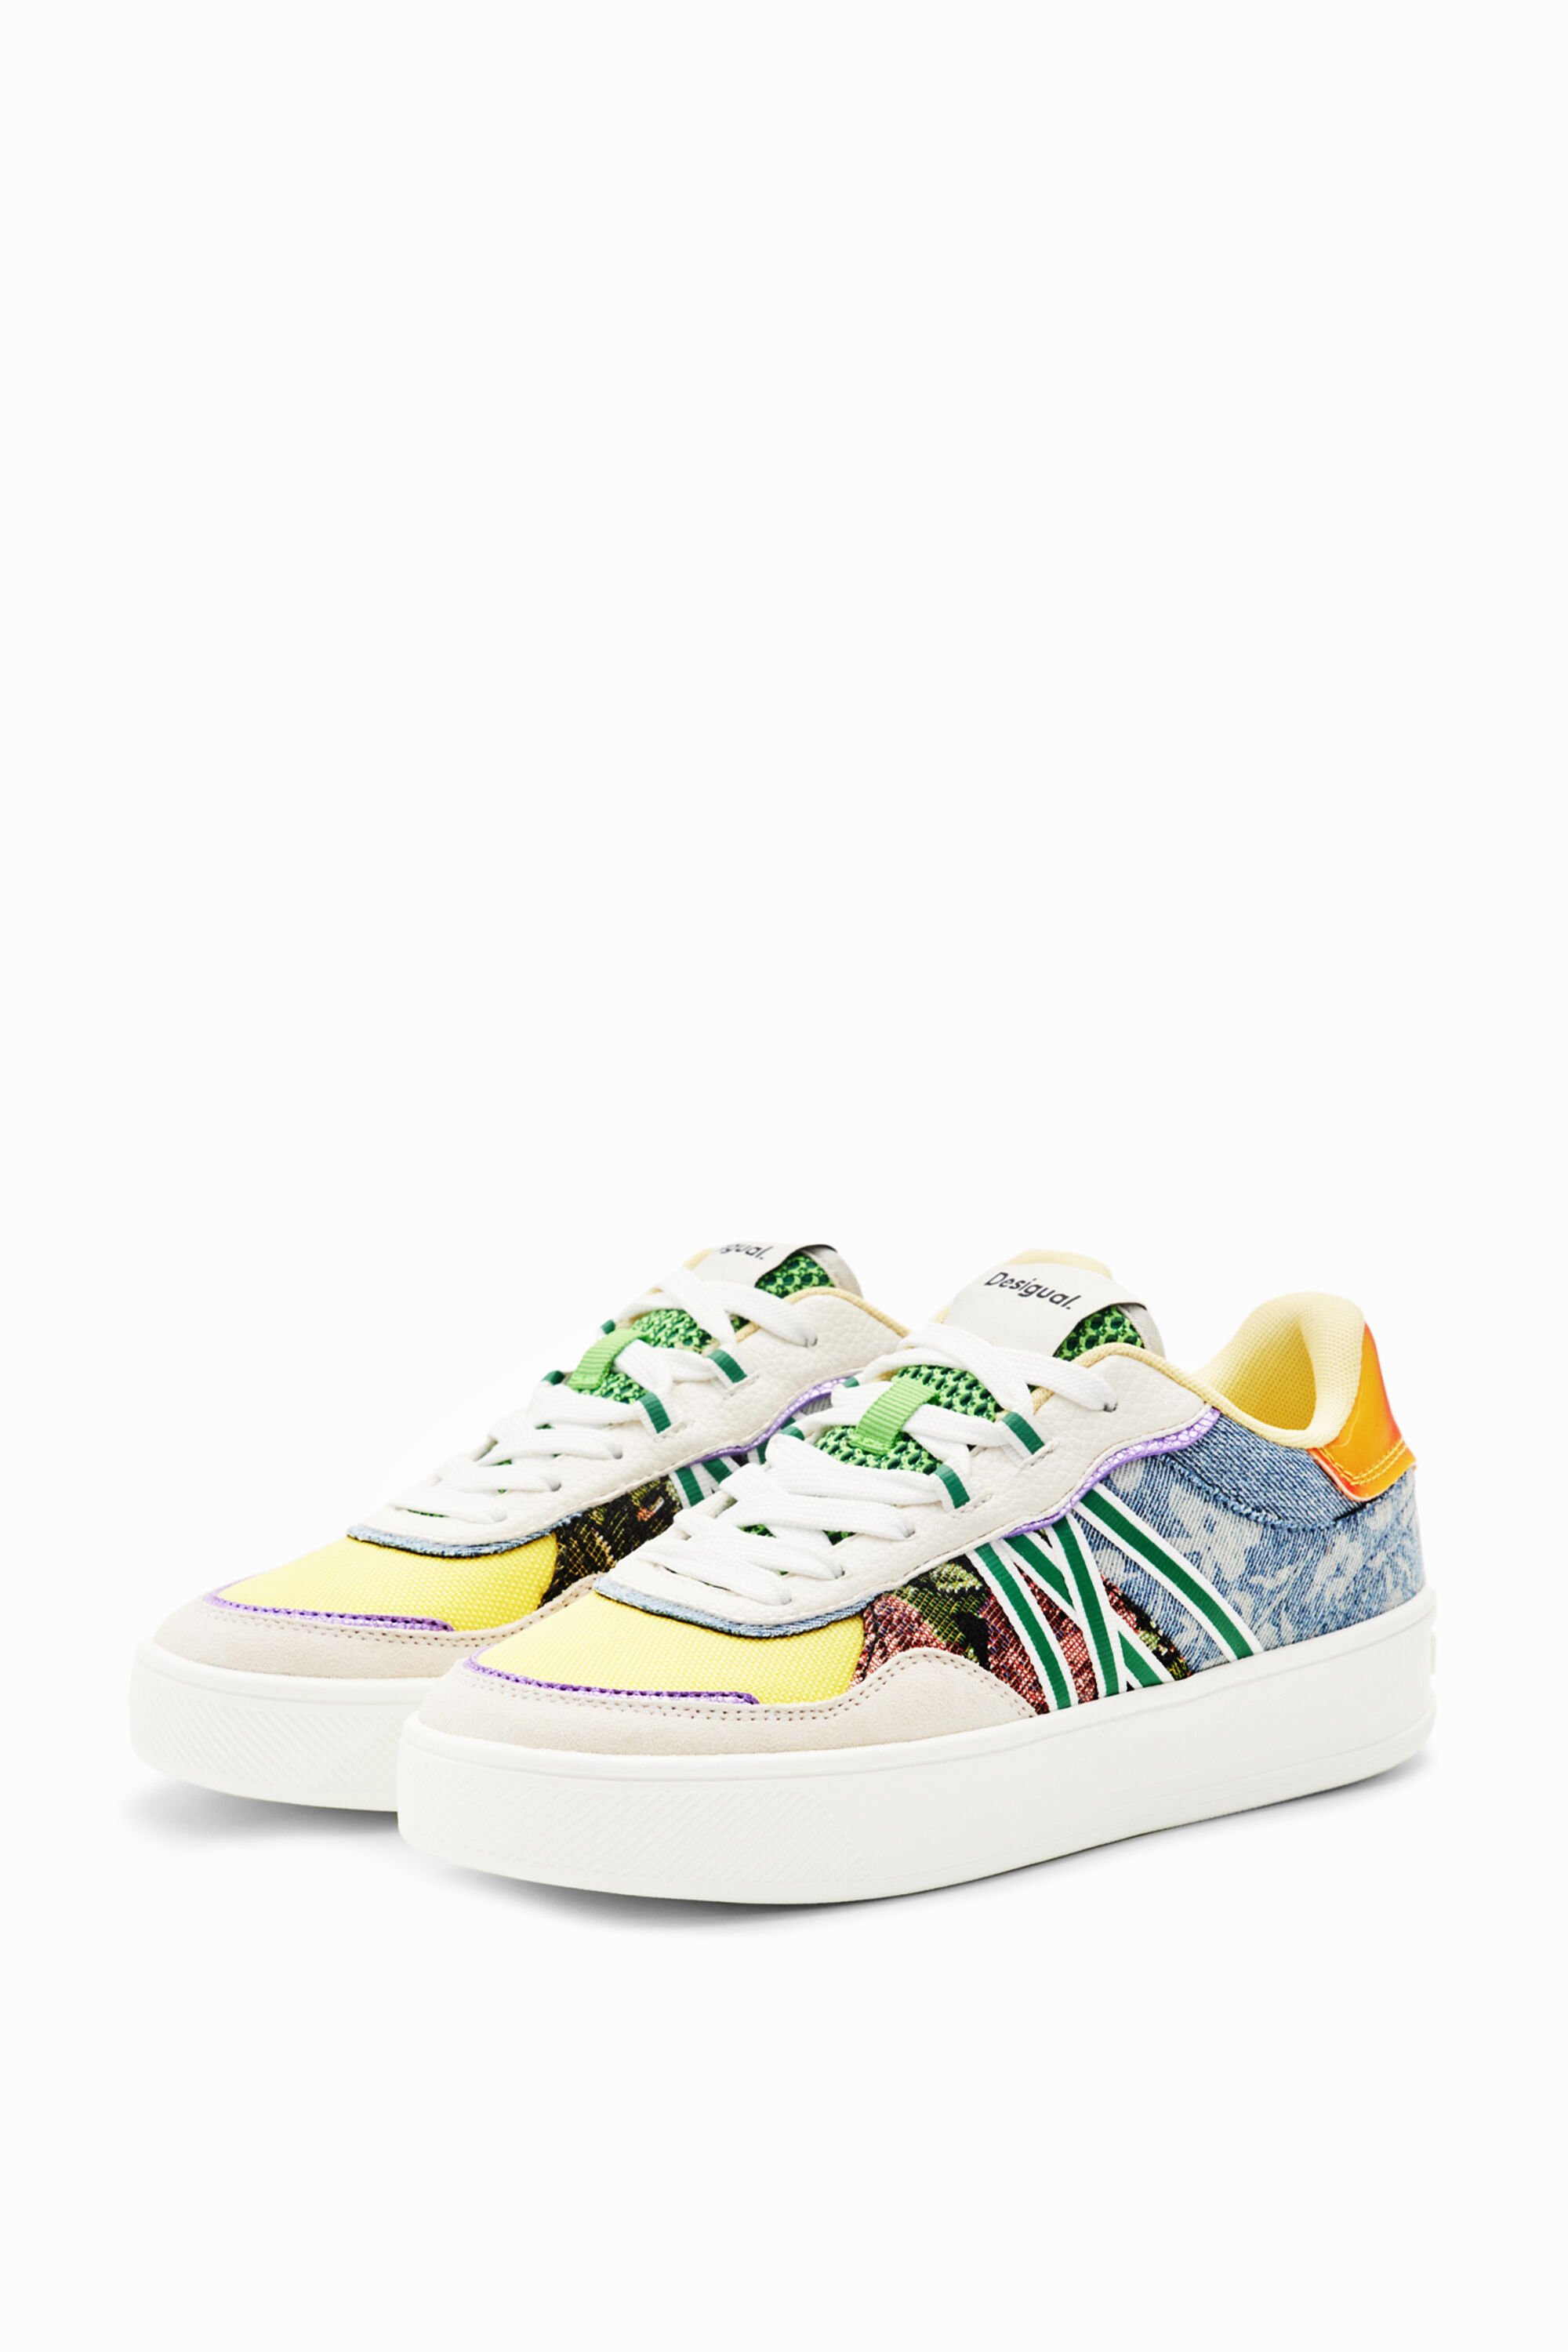 Shop Desigual Patchwork Platform Sneakers In Material Finishes